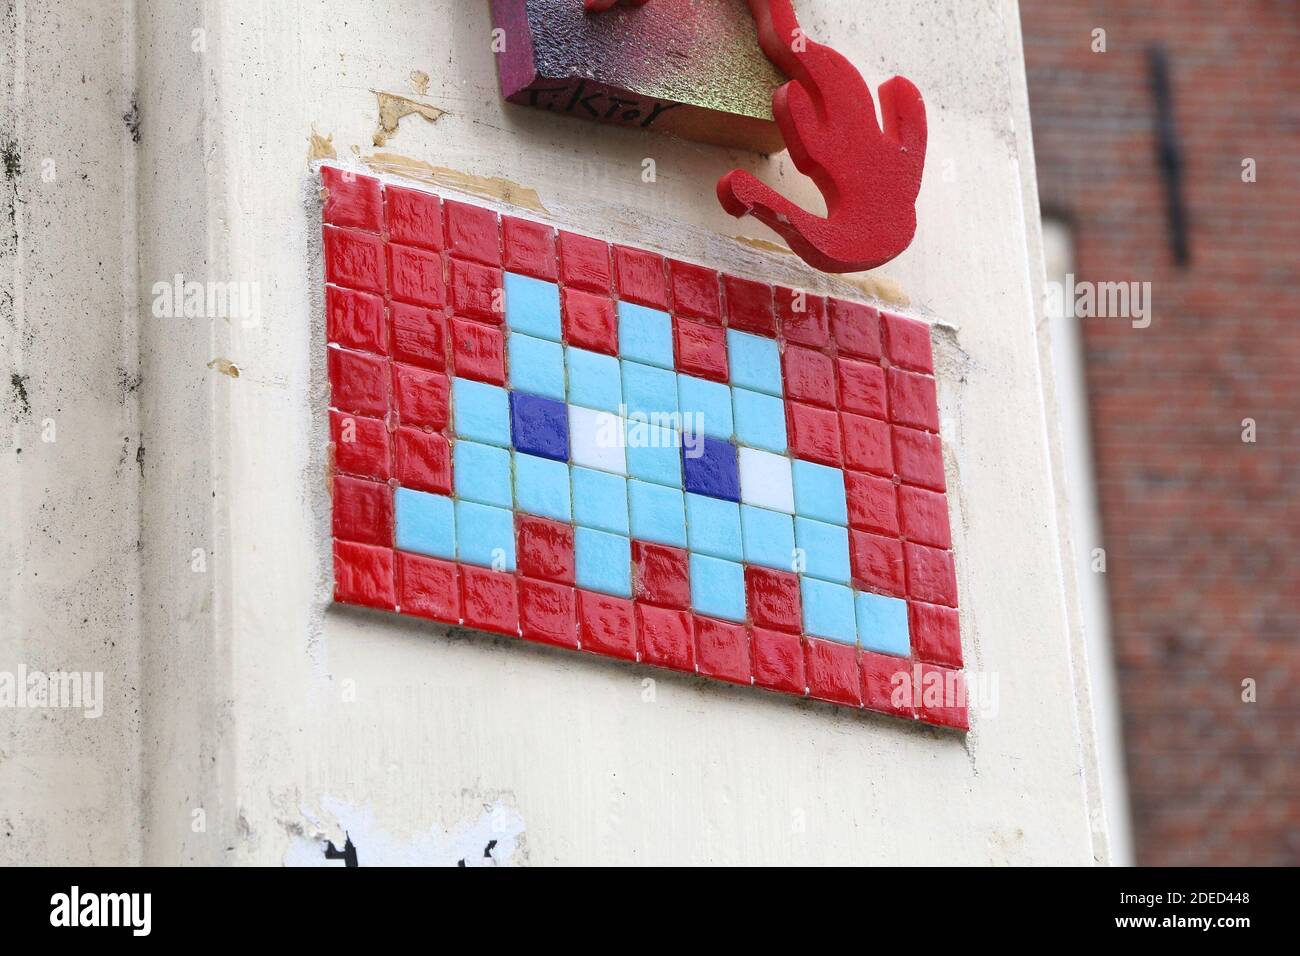 AMSTERDAM, NETHERLANDS - JULY 8, 2017: Space Invaders urban art mosaic in Amsterdam. The video game themed tile artwork was created in many cities by Stock Photo